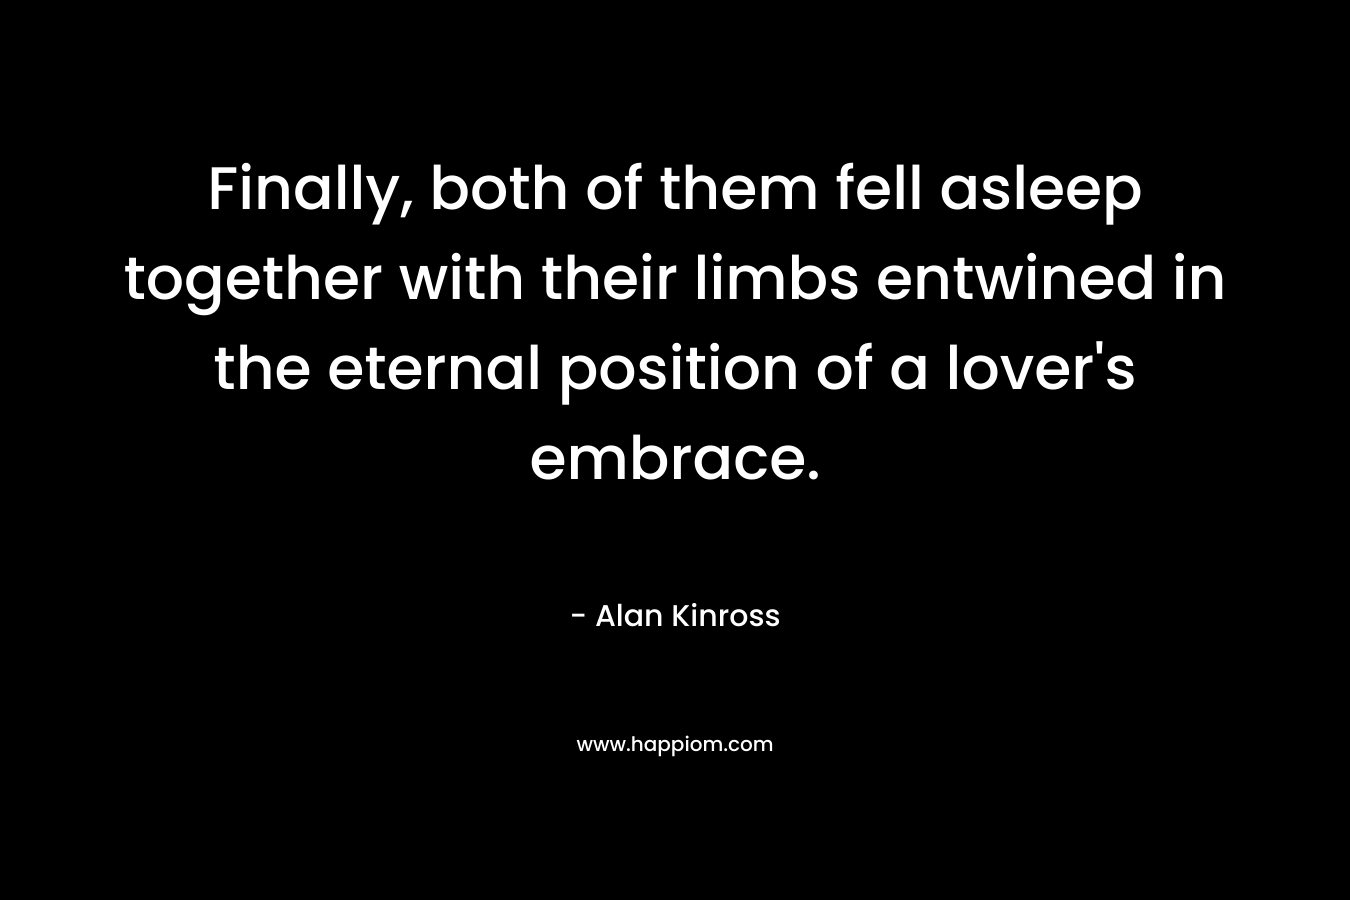 Finally, both of them fell asleep together with their limbs entwined in the eternal position of a lover’s embrace. – Alan Kinross